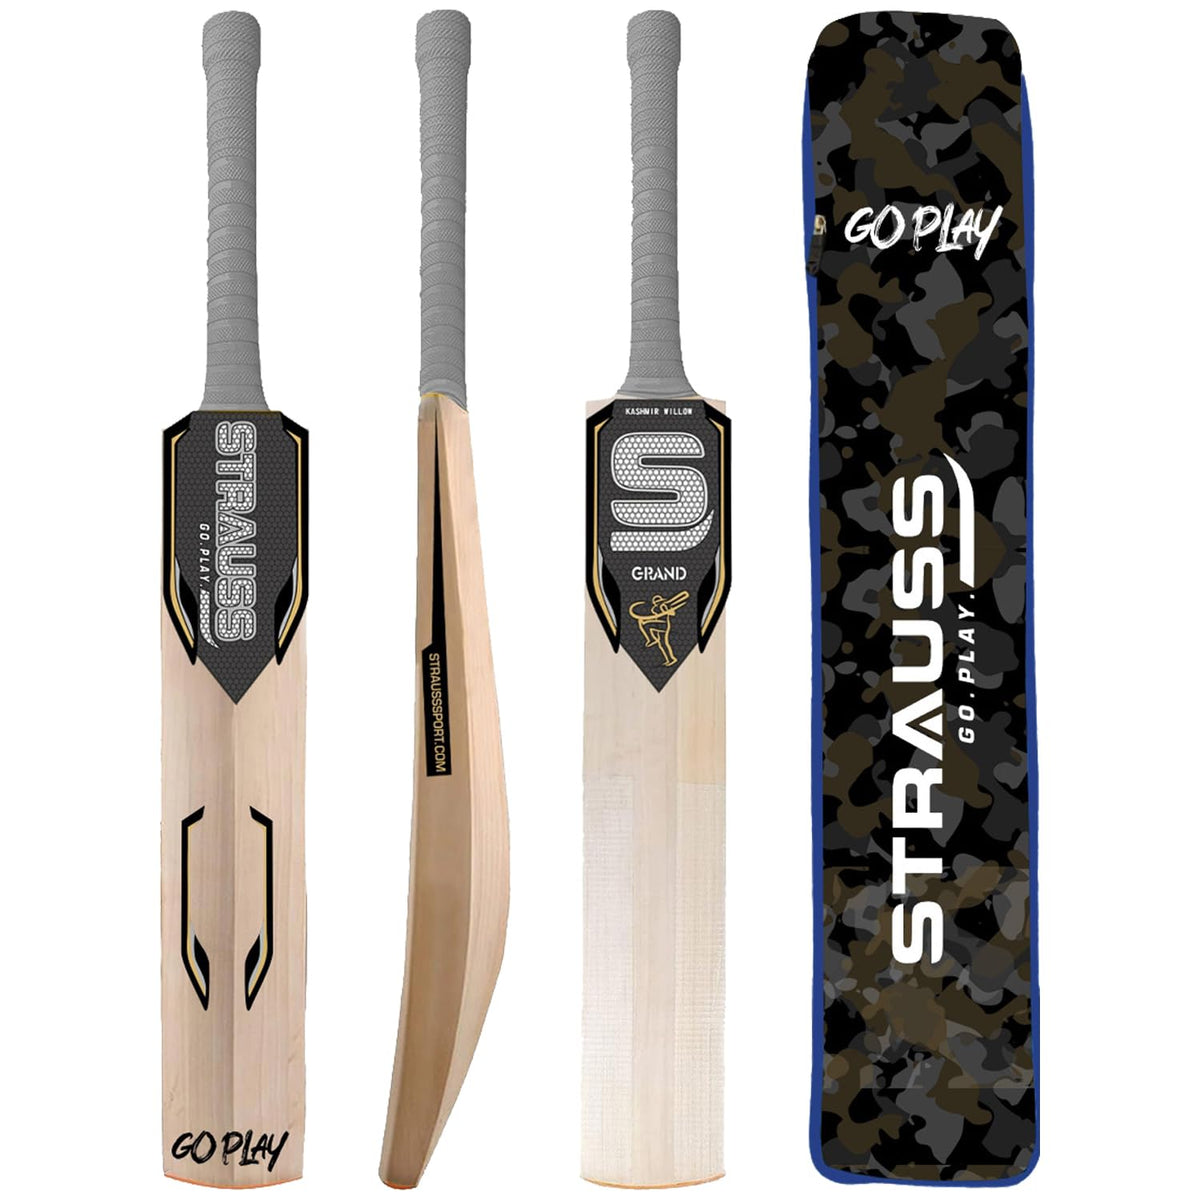 STRAUSS Grand Kashmir Willow Cricket Bat | Size: 6| Suitable for Leather Ball| Grey| Ideal for Boys/Youth/Adults (850-1000 Grams)